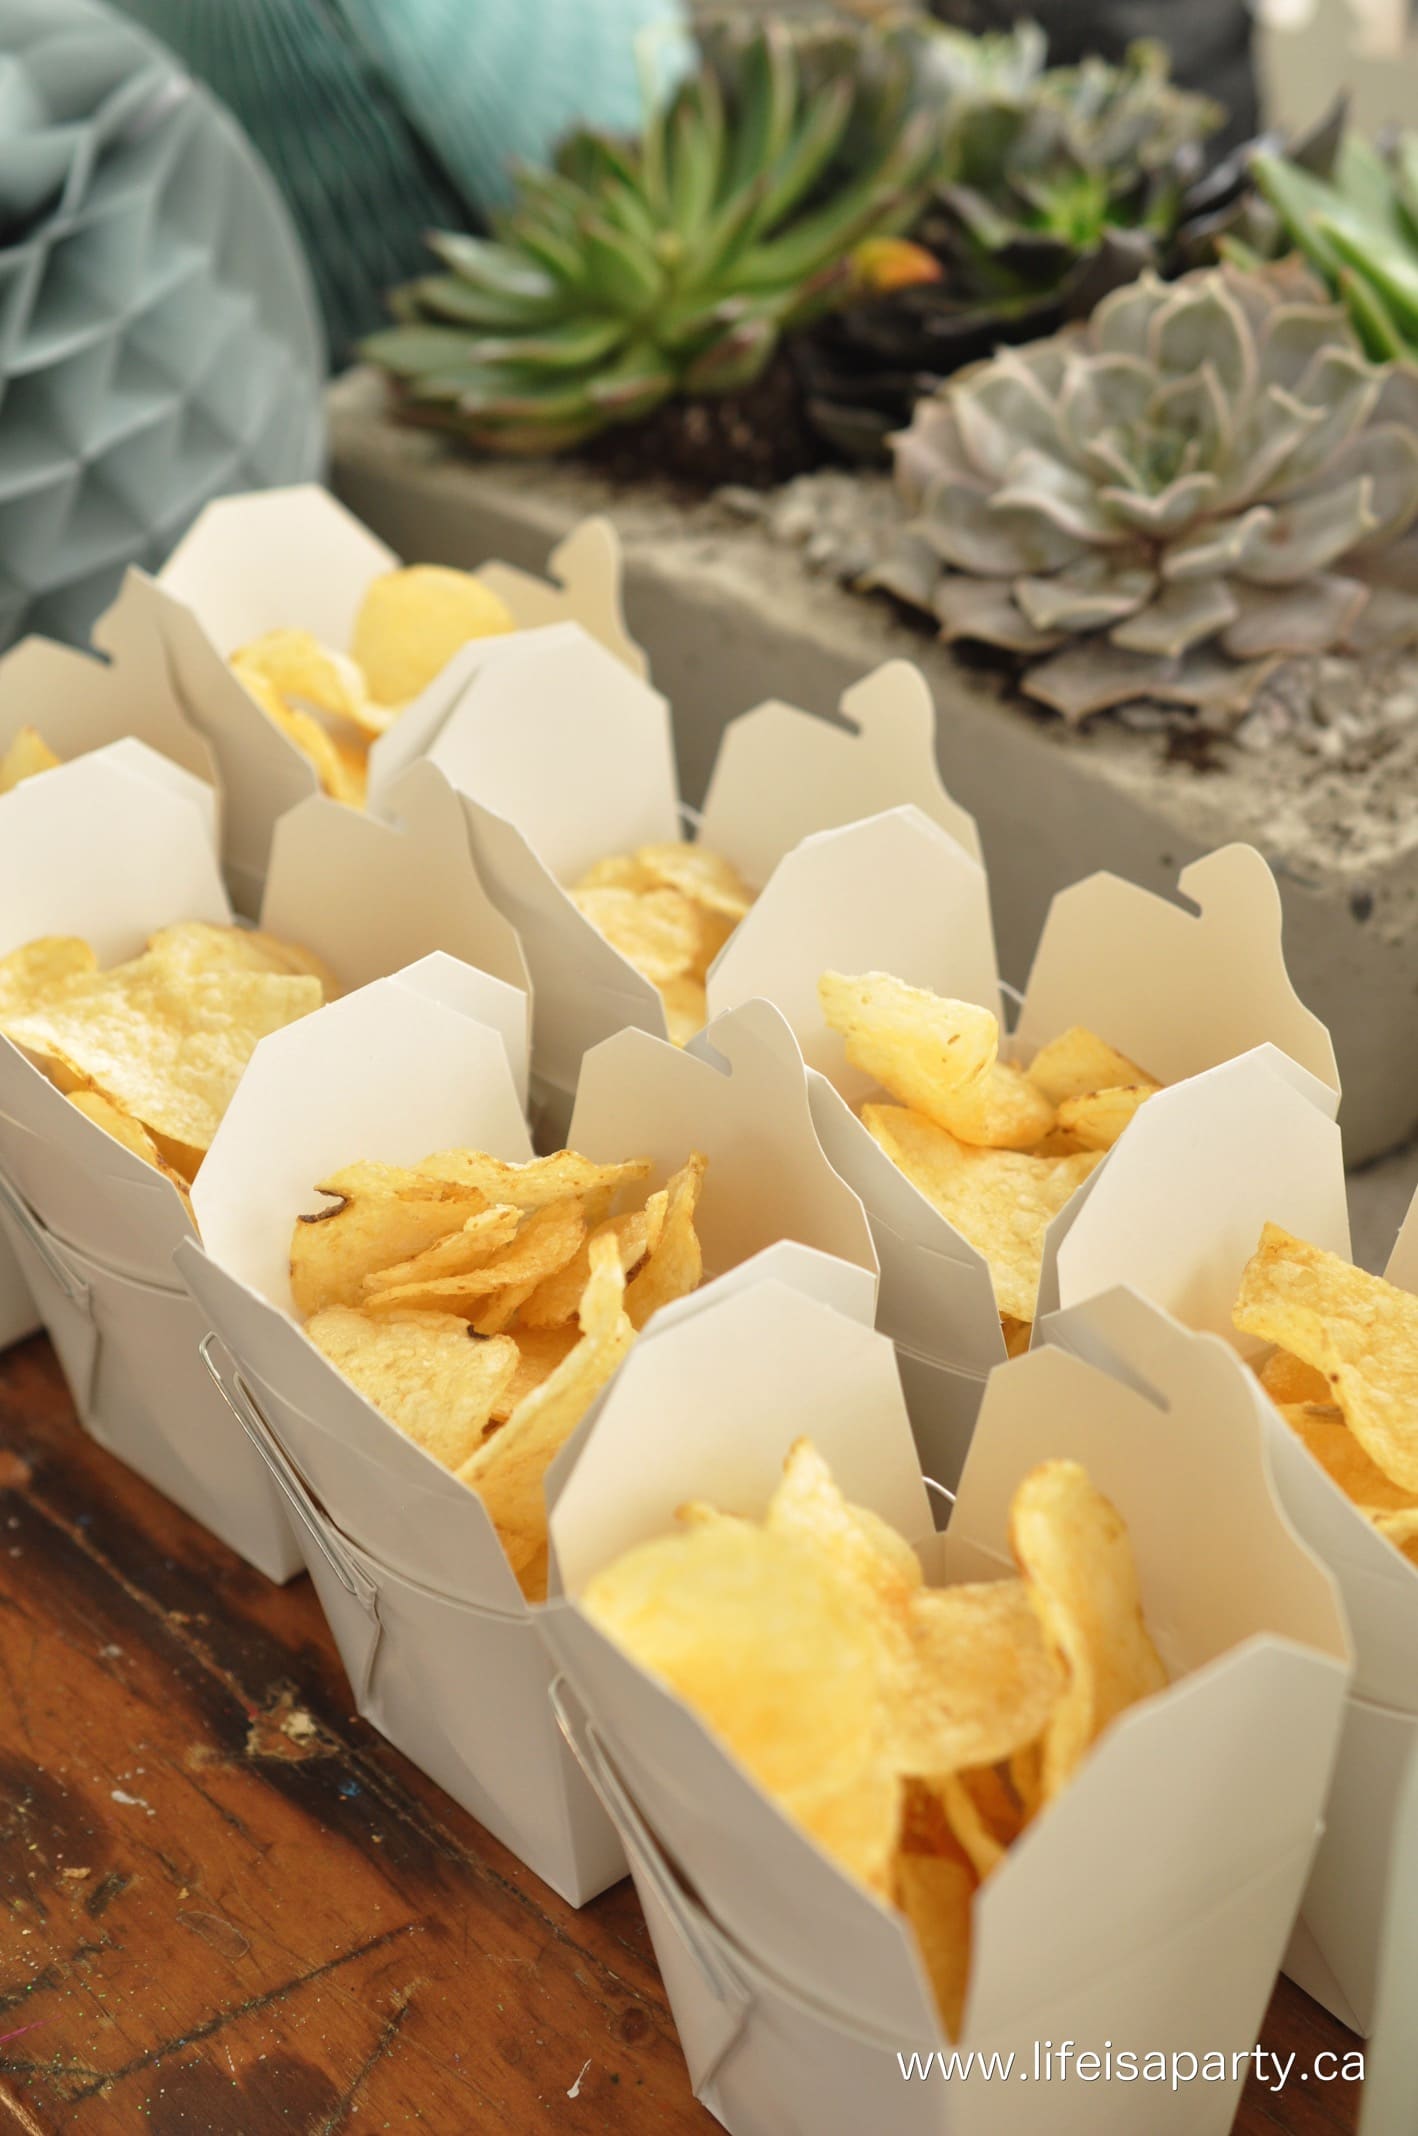 chips in takeout boxes